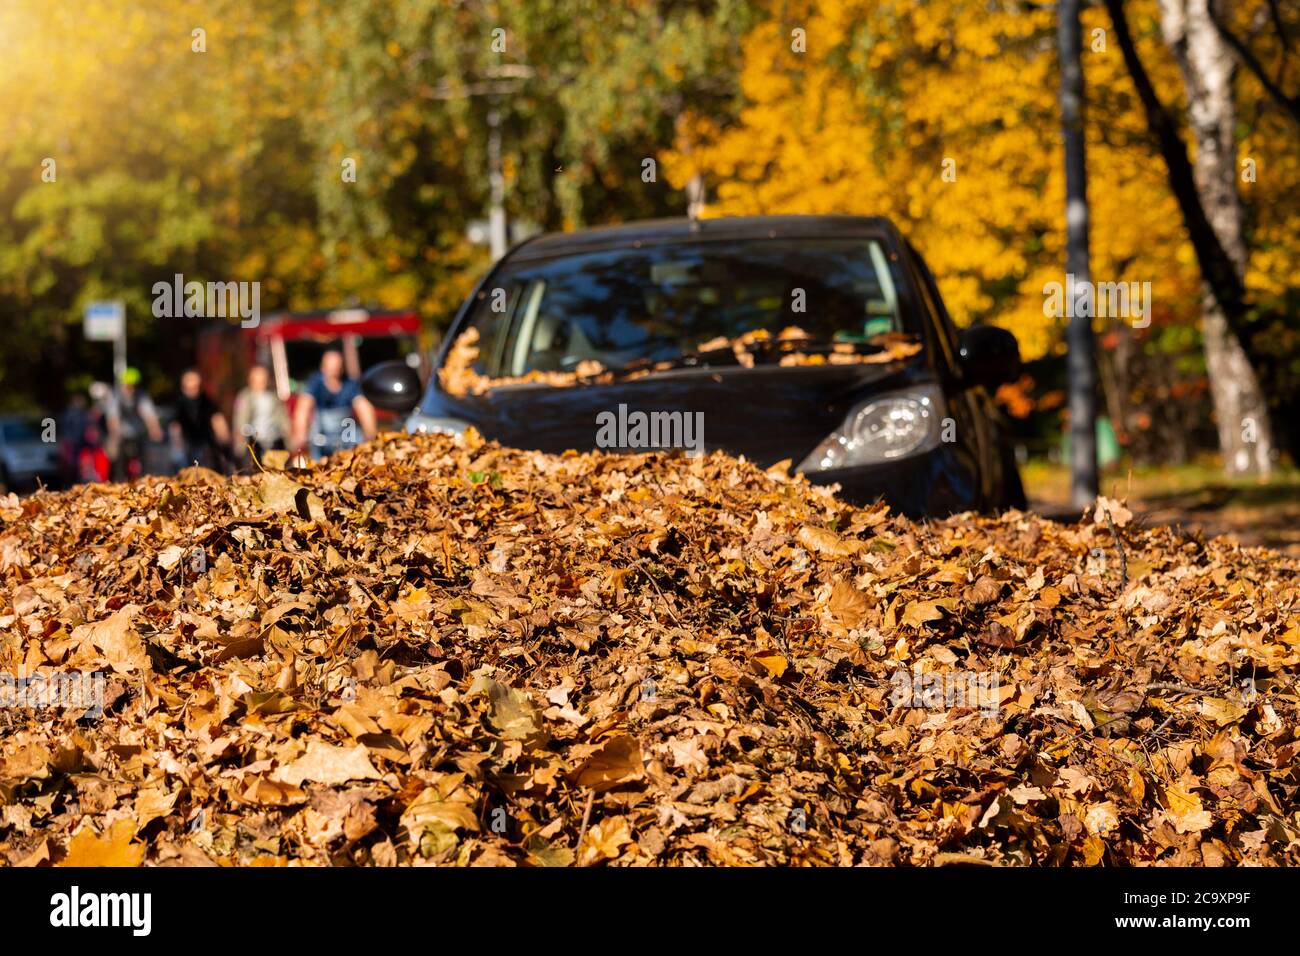 The car is parked in a pile of autumn leaves Stock Photo